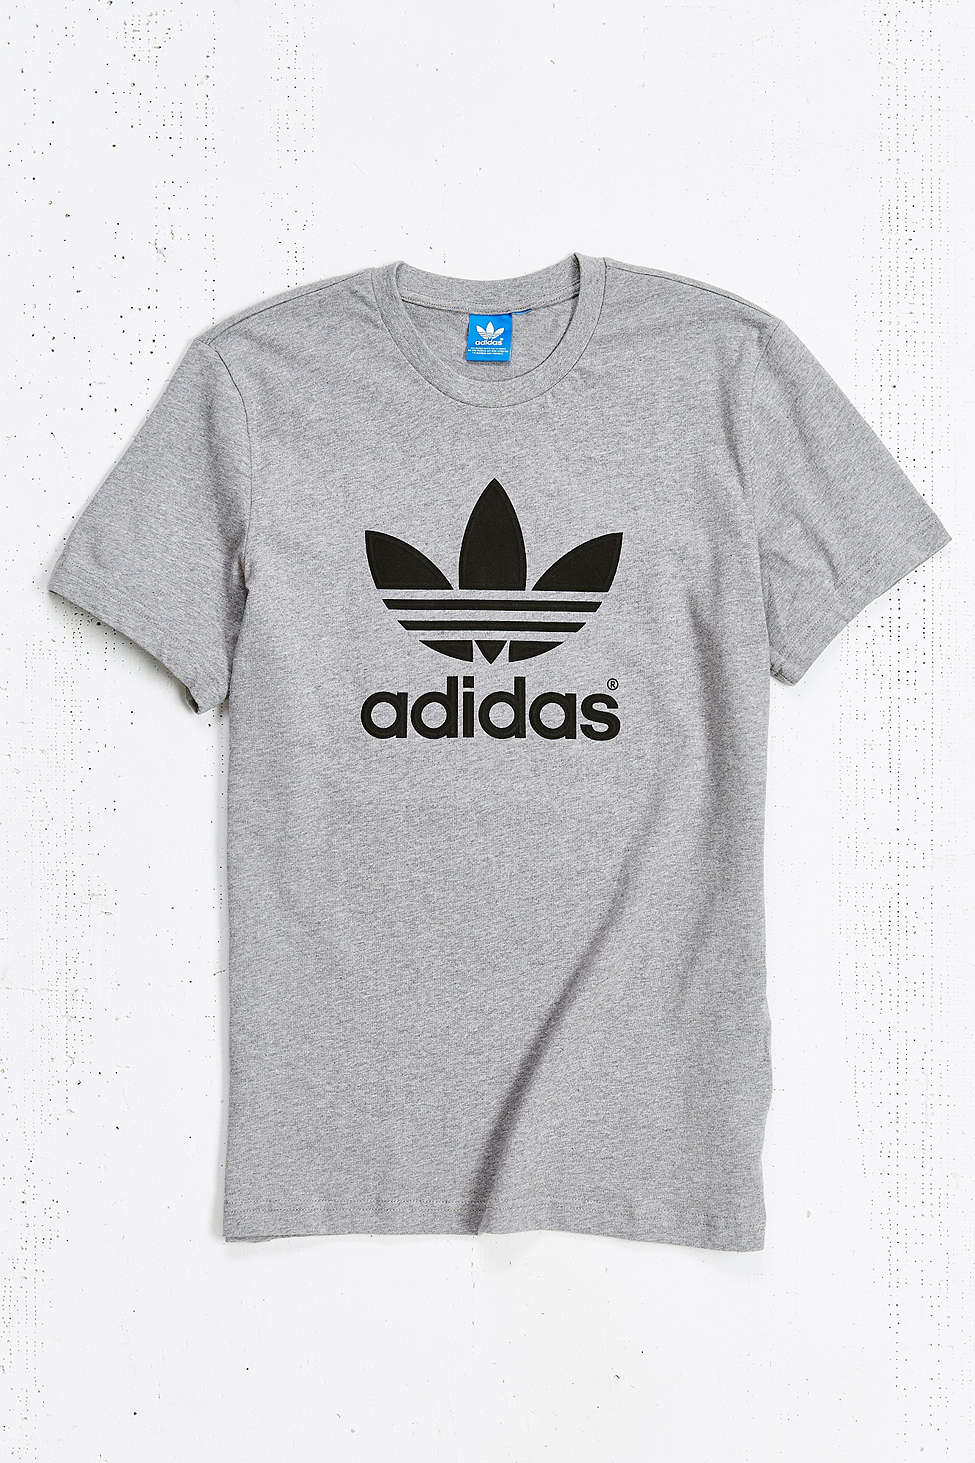 adidas shirt urban outfitters